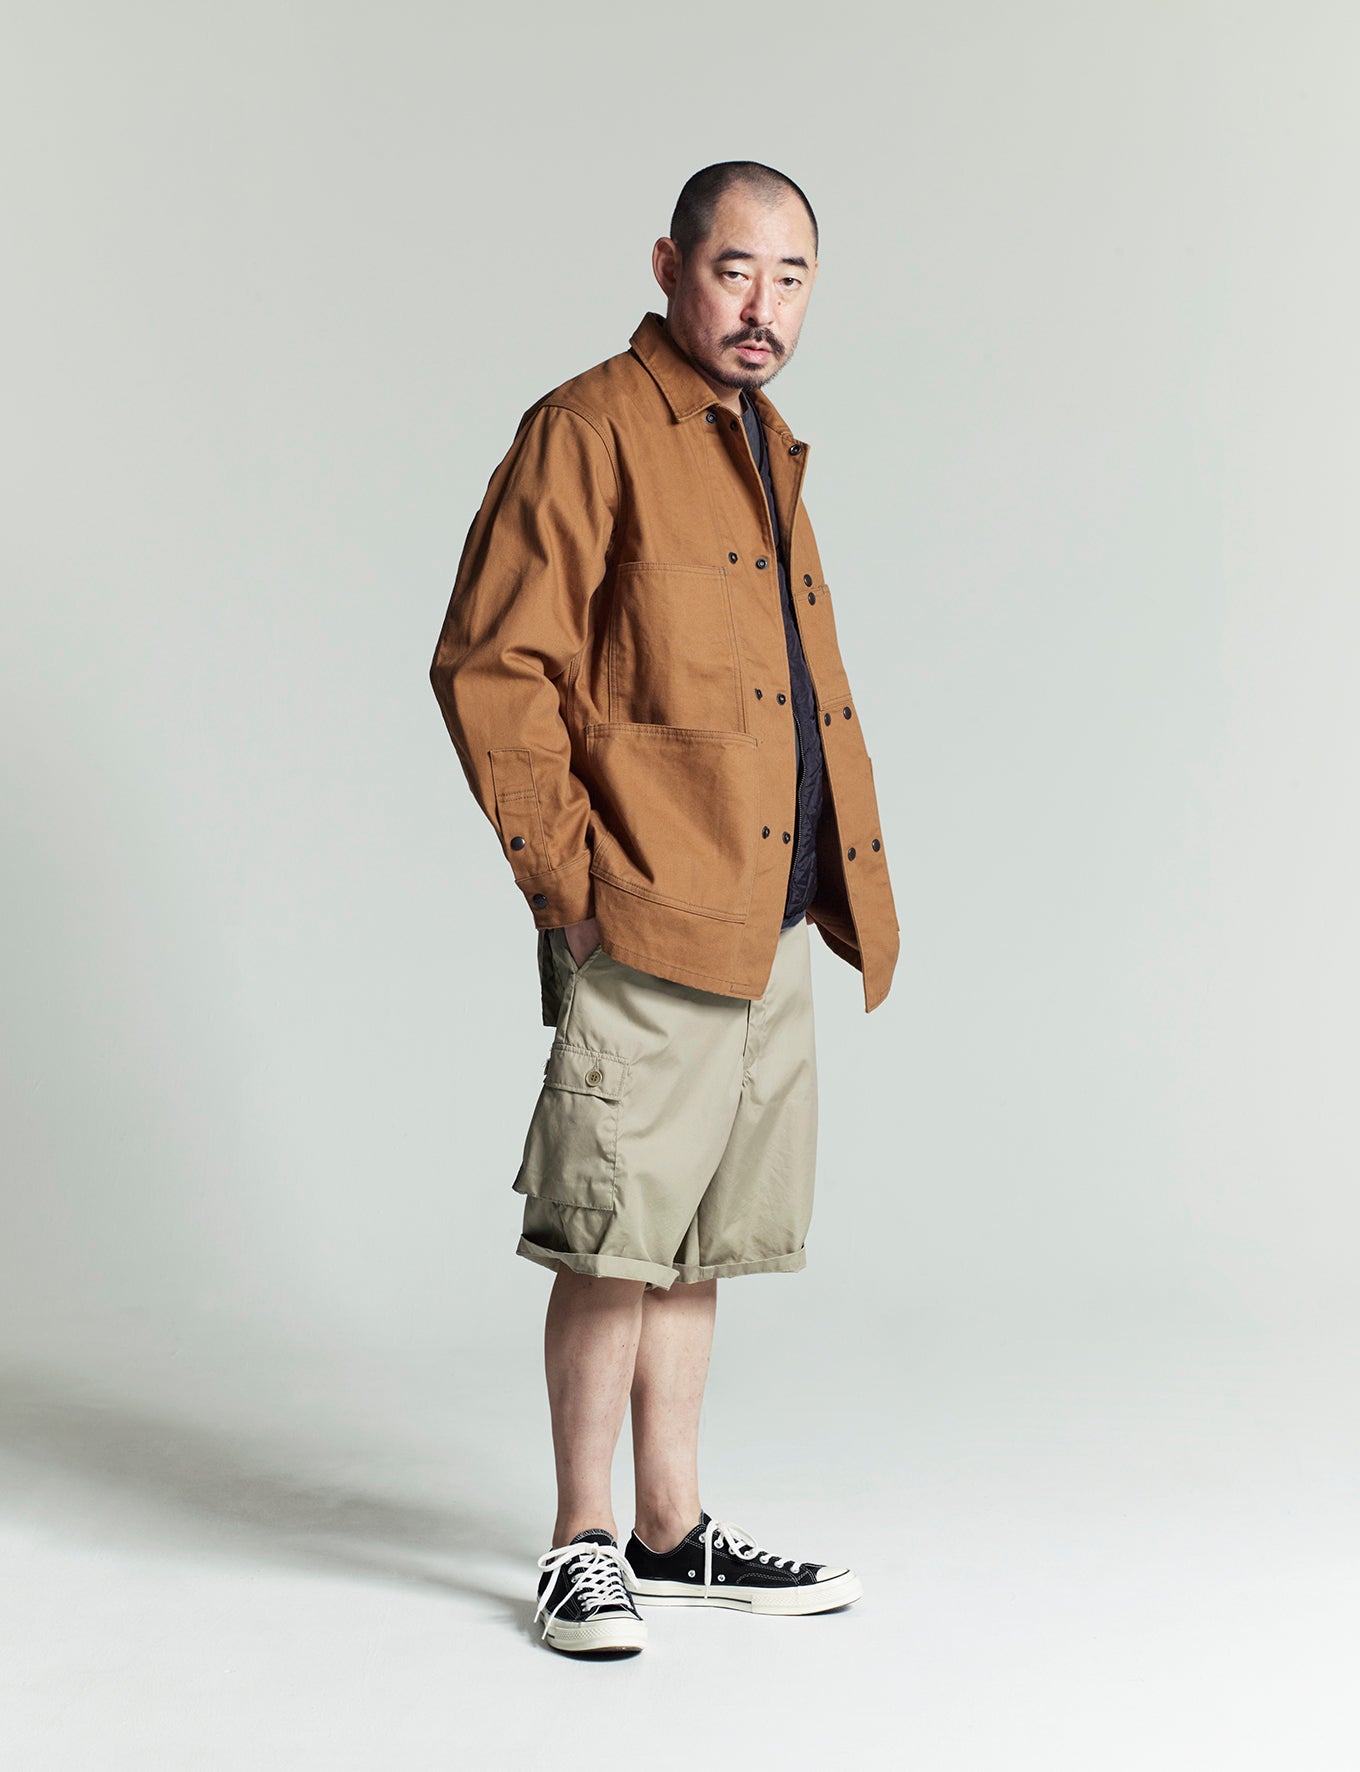 CJ123A-1 - A-1 CLOTHING × THE CORONA UTILITY・Cross Town Jacket / Cotton Duck - Brown